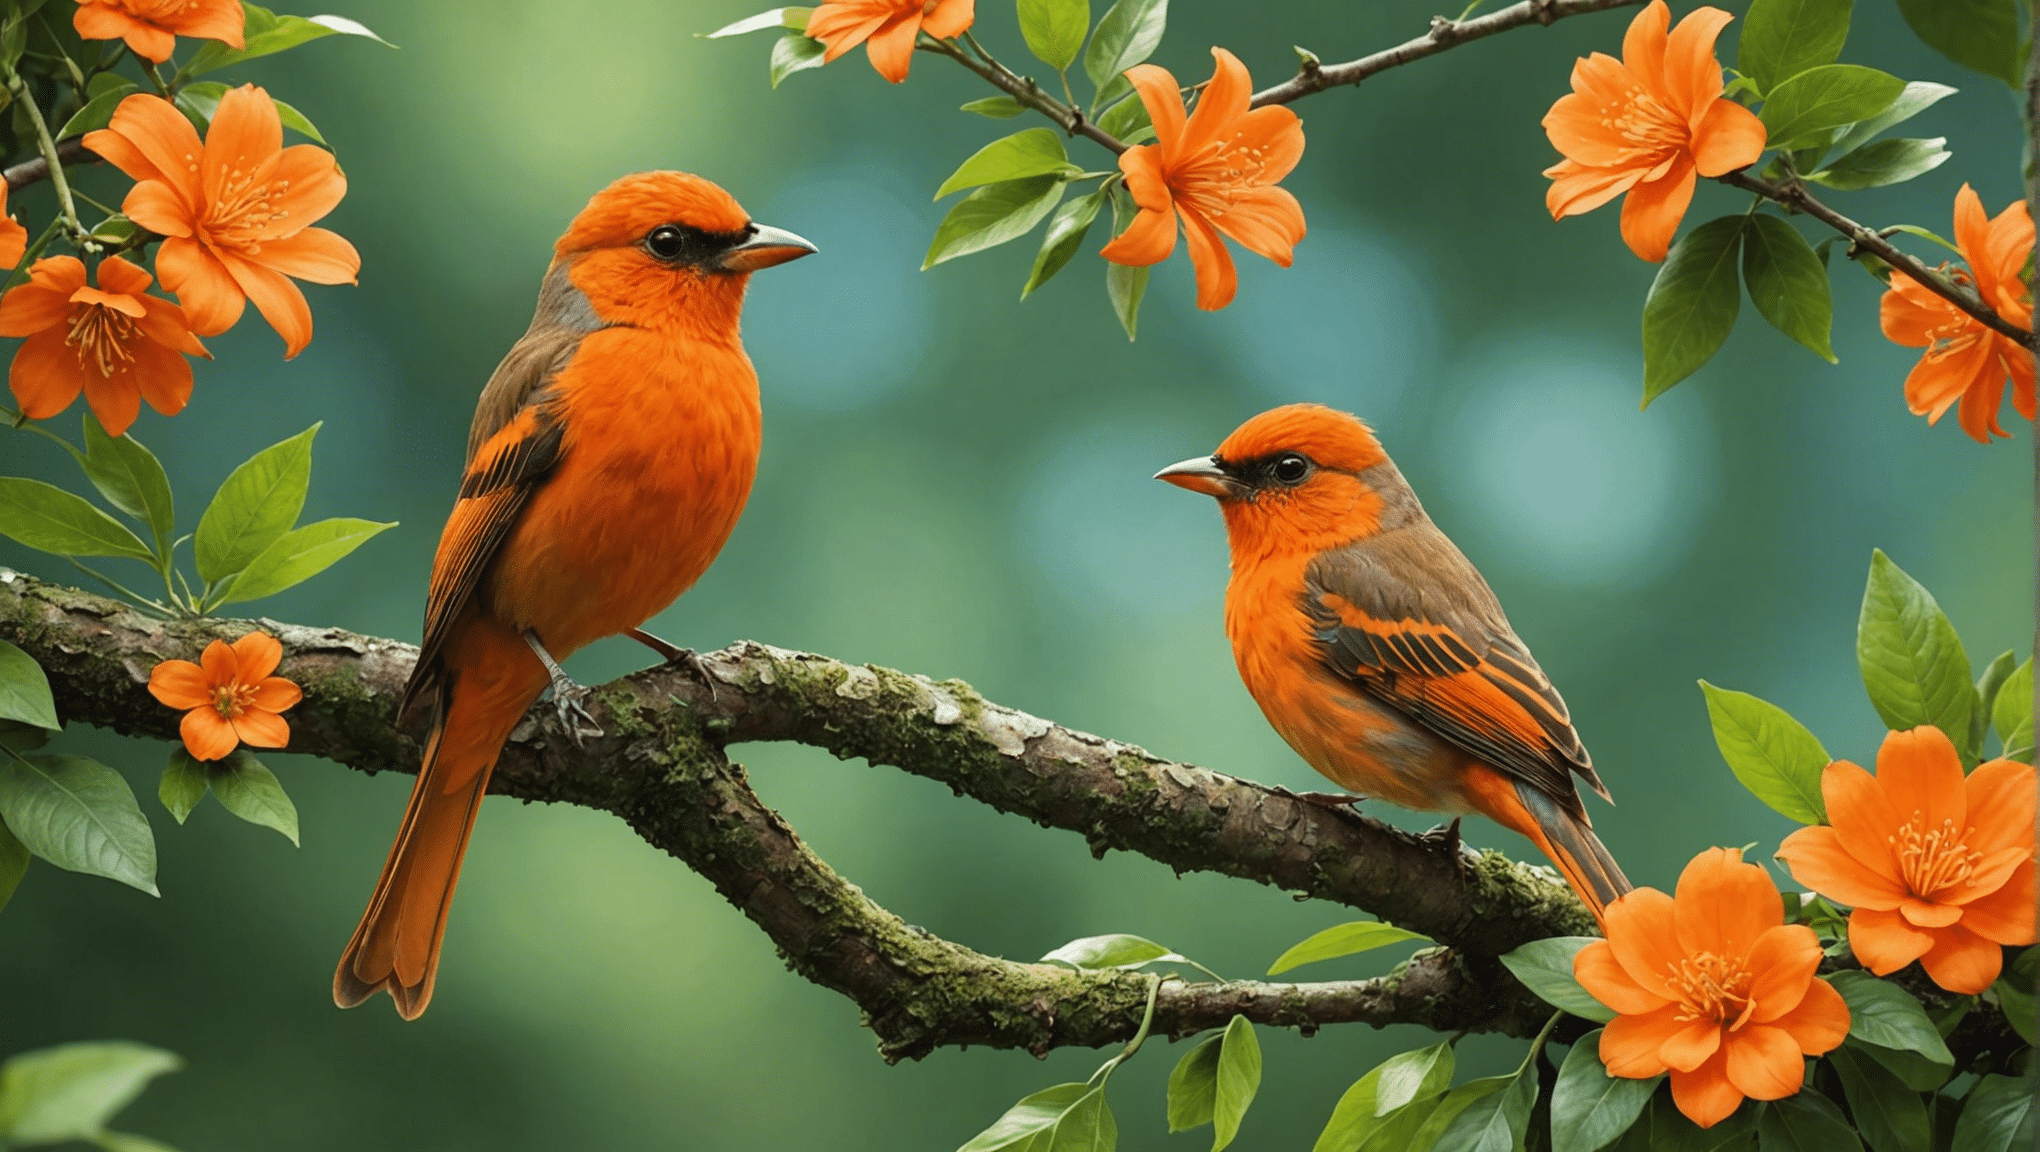 discover the truth about orange birds: are they real or just a myth? get the facts and find out the reality behind the orange bird mystery.